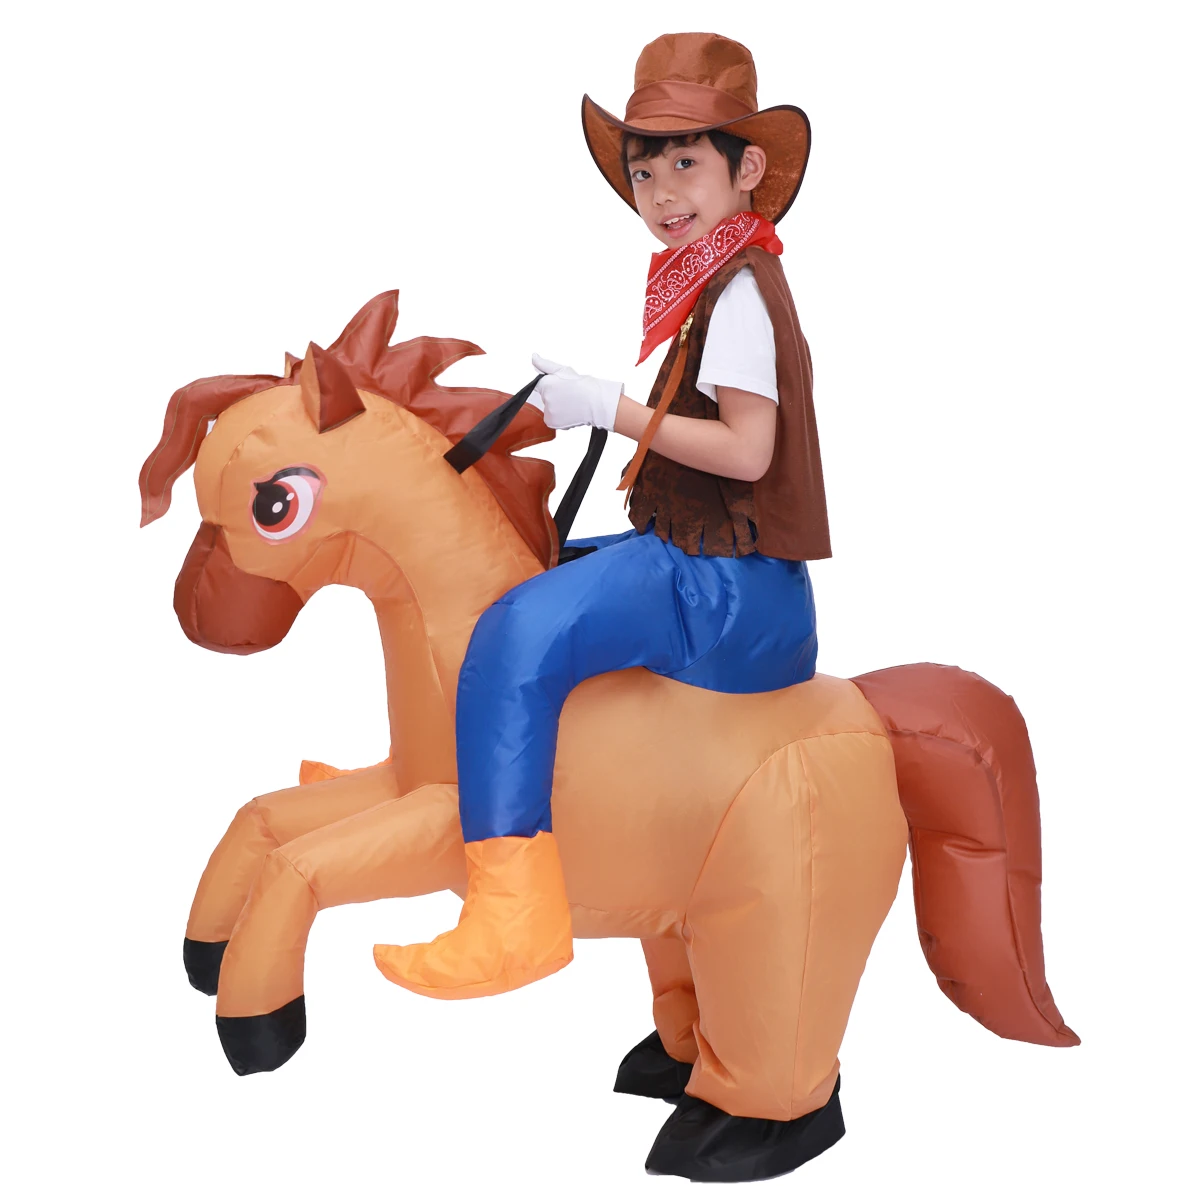 Kids Child Inflatable Horse Costume Cosplay Girls Boys Cowboy Ride Horse Funny Halloween Purim Party Inflated Garment Disfraces umorden kids child vampire costume count dracula cosplay boys vampiress for girls purim halloween party fantasia dress up